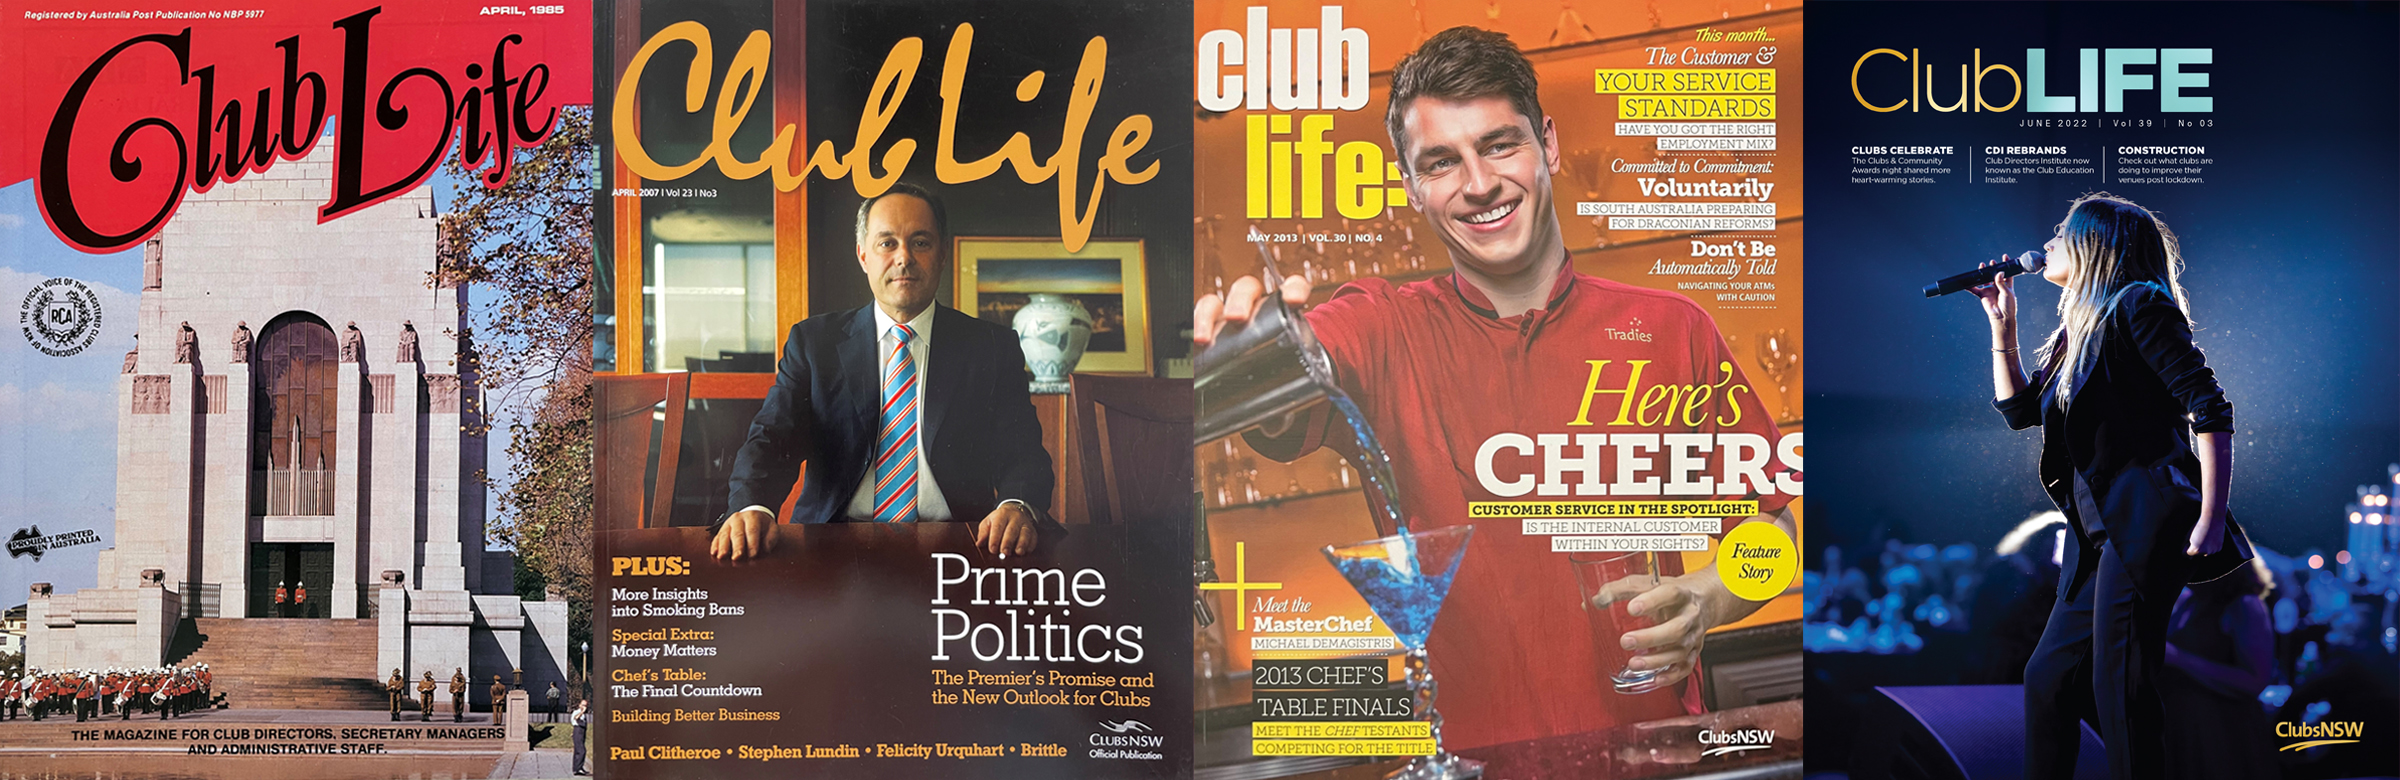 ClubLIFE Covers